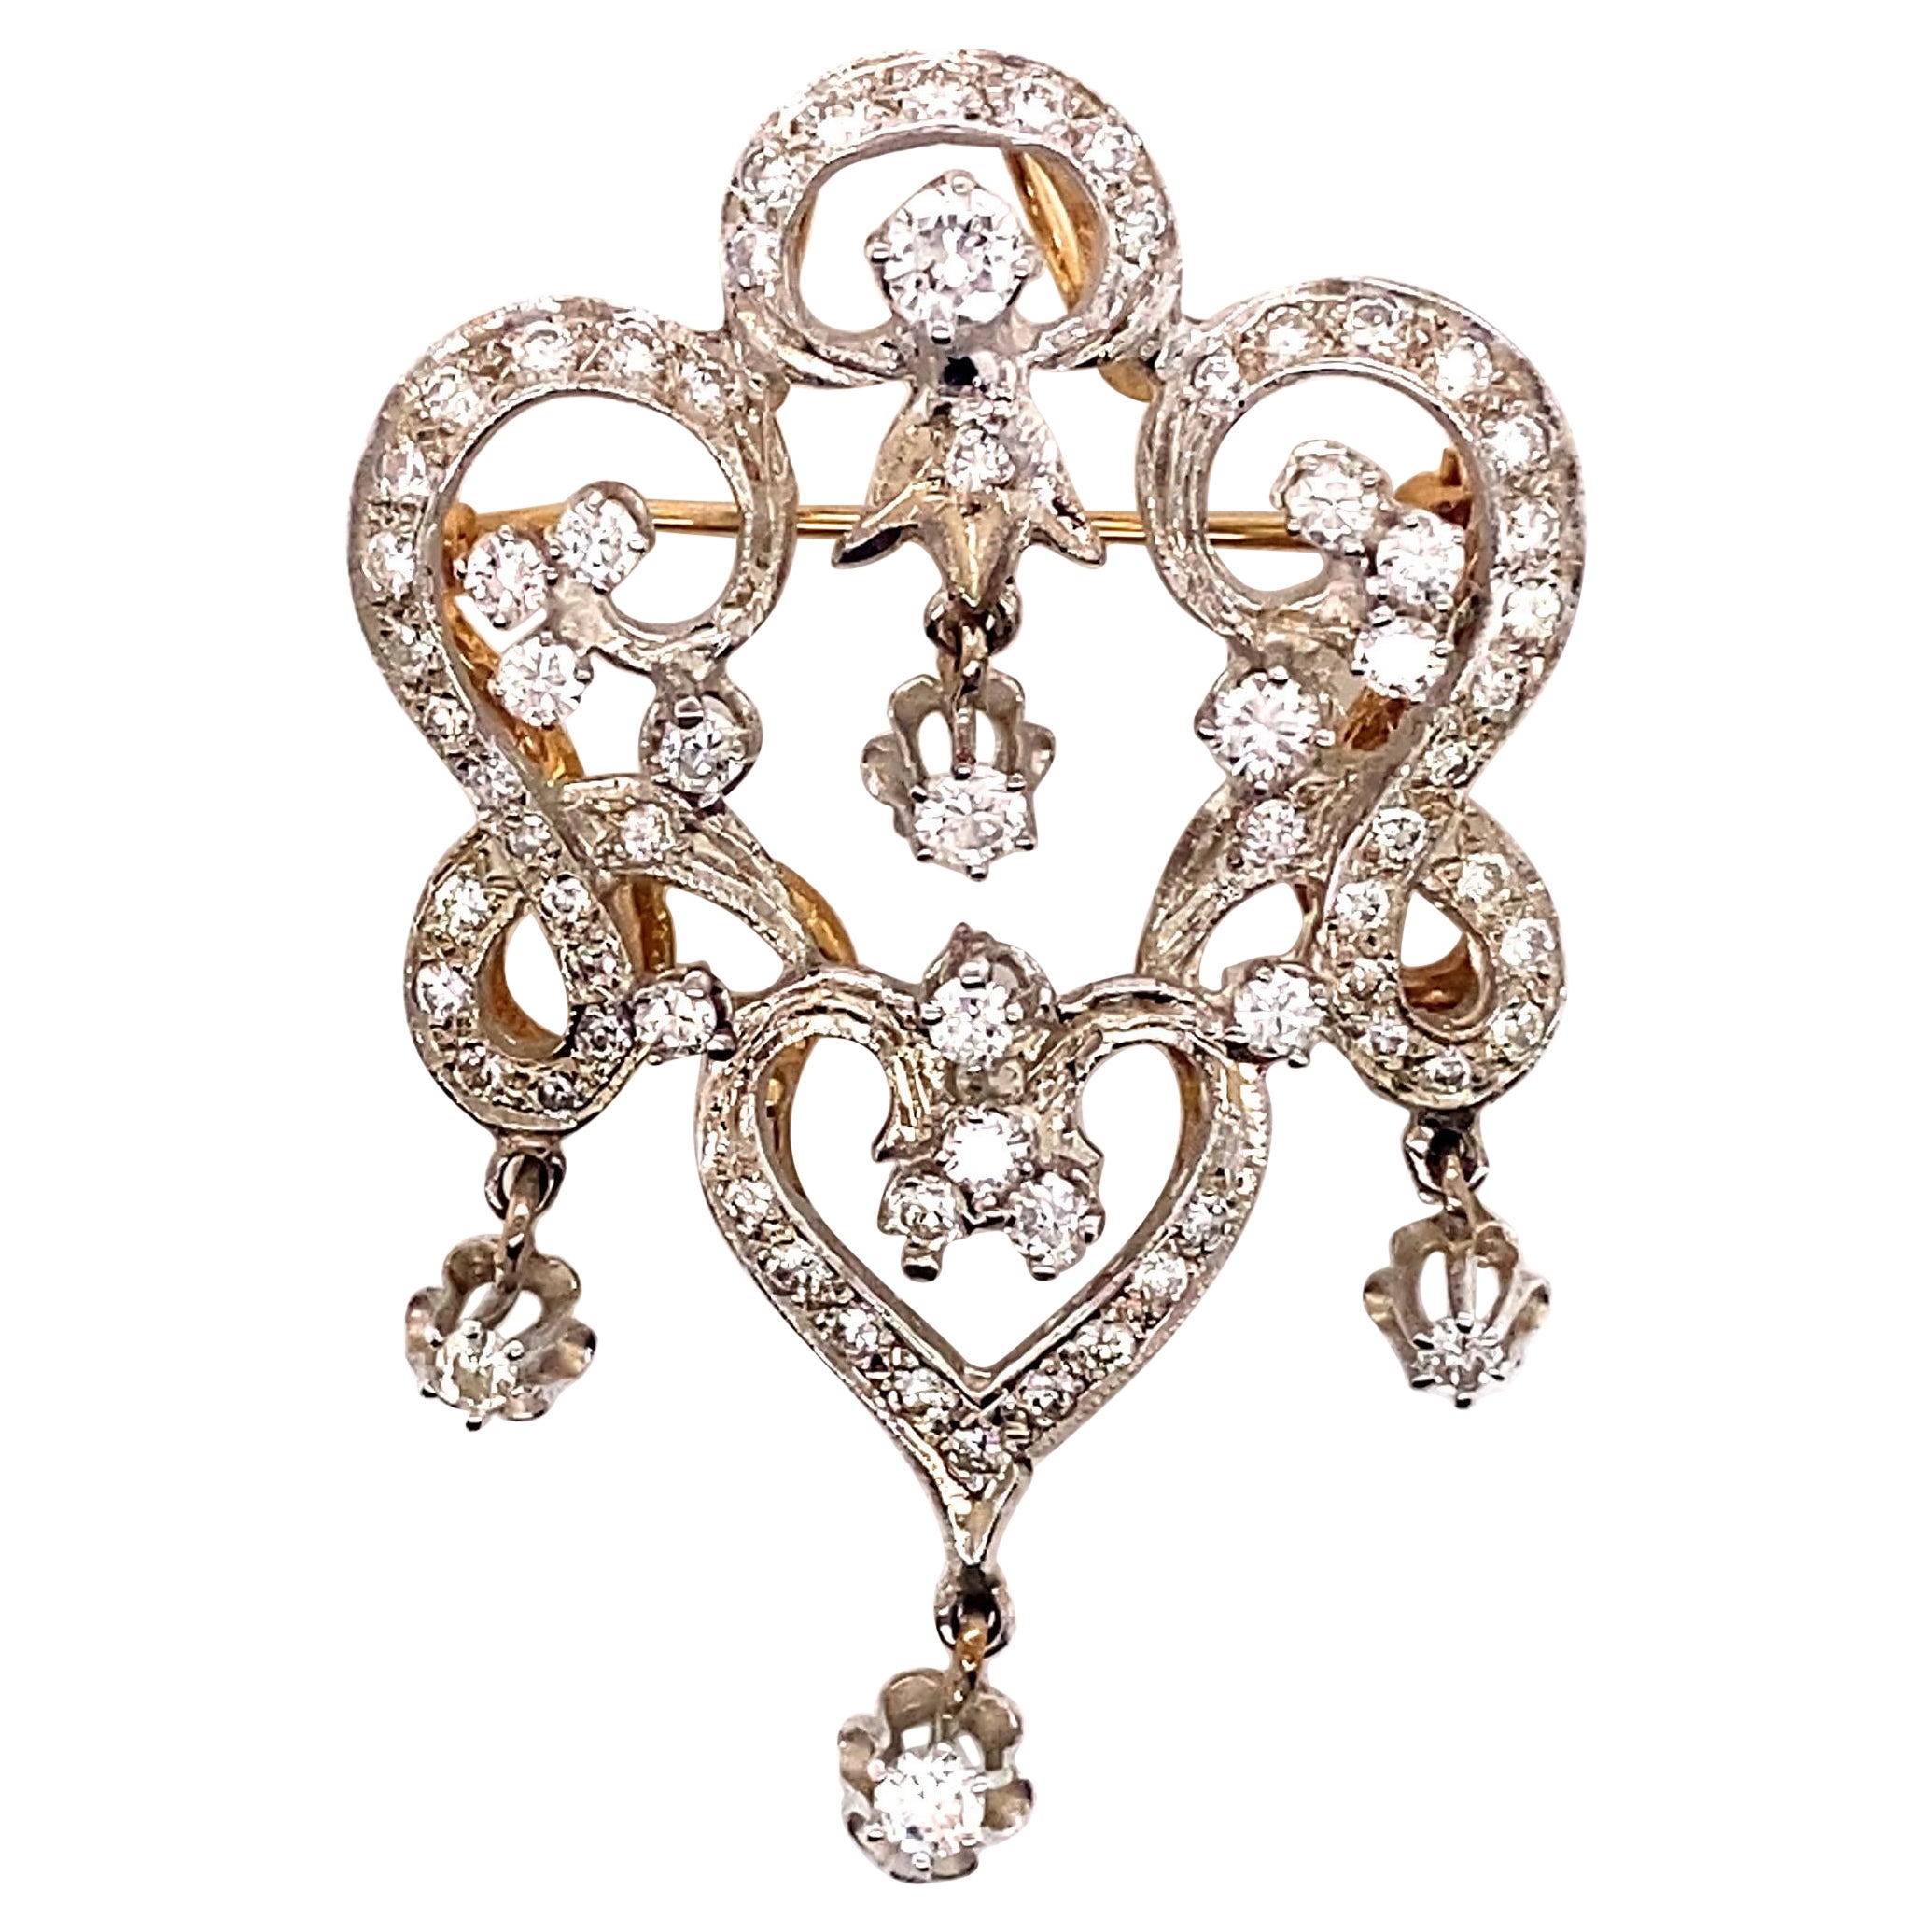 Vintage 1950’s Edwardian Reproduction Diamond Chandelier Brooch and Pendant